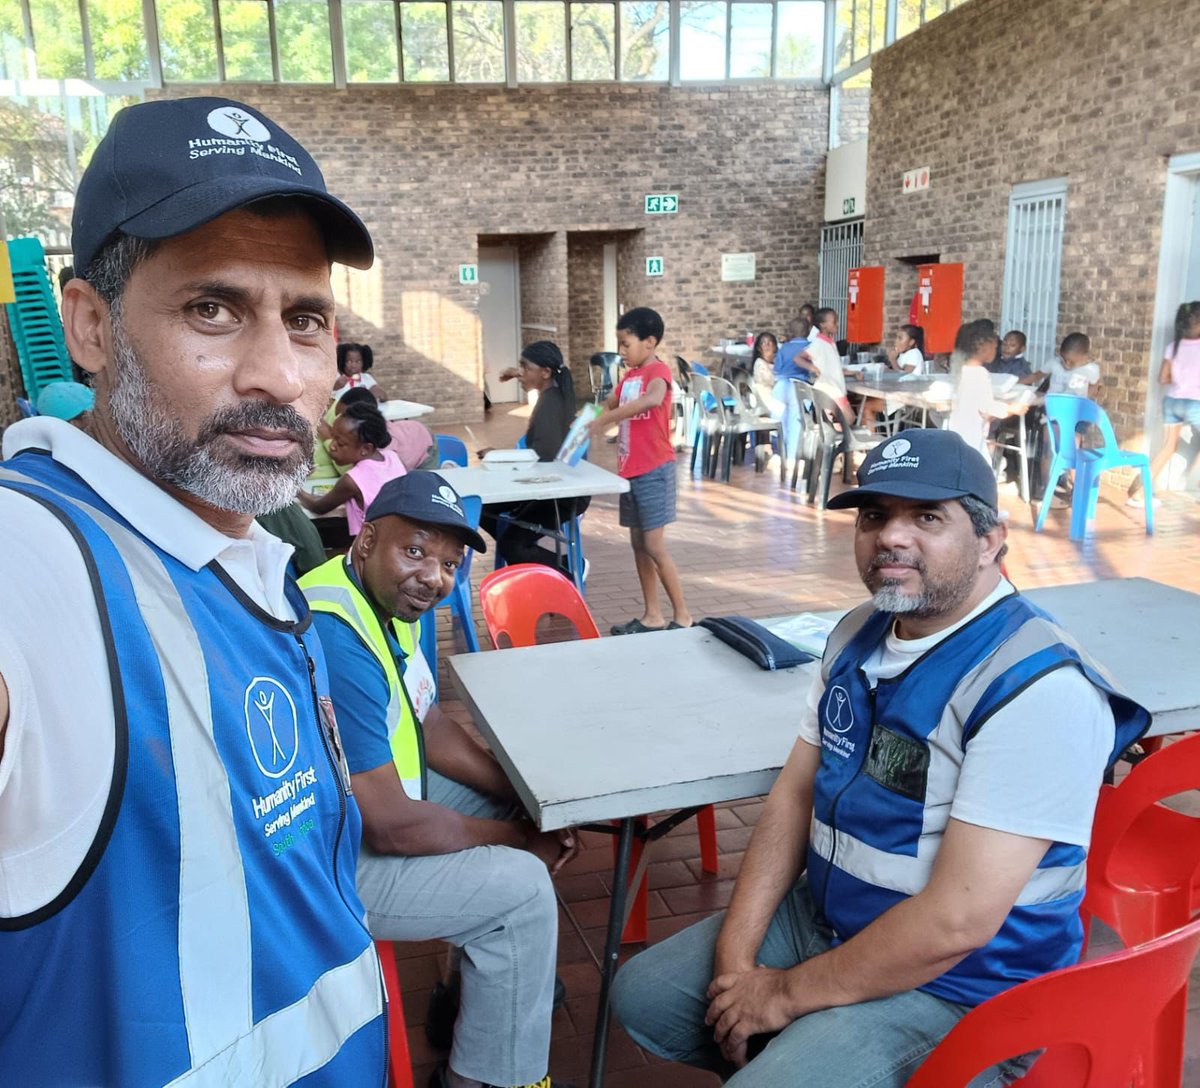 Our @humanityfirstZA volunteers have been serving meals in Cape Town an Johannesburg in #SouthAfrica today as part of #HFDay24